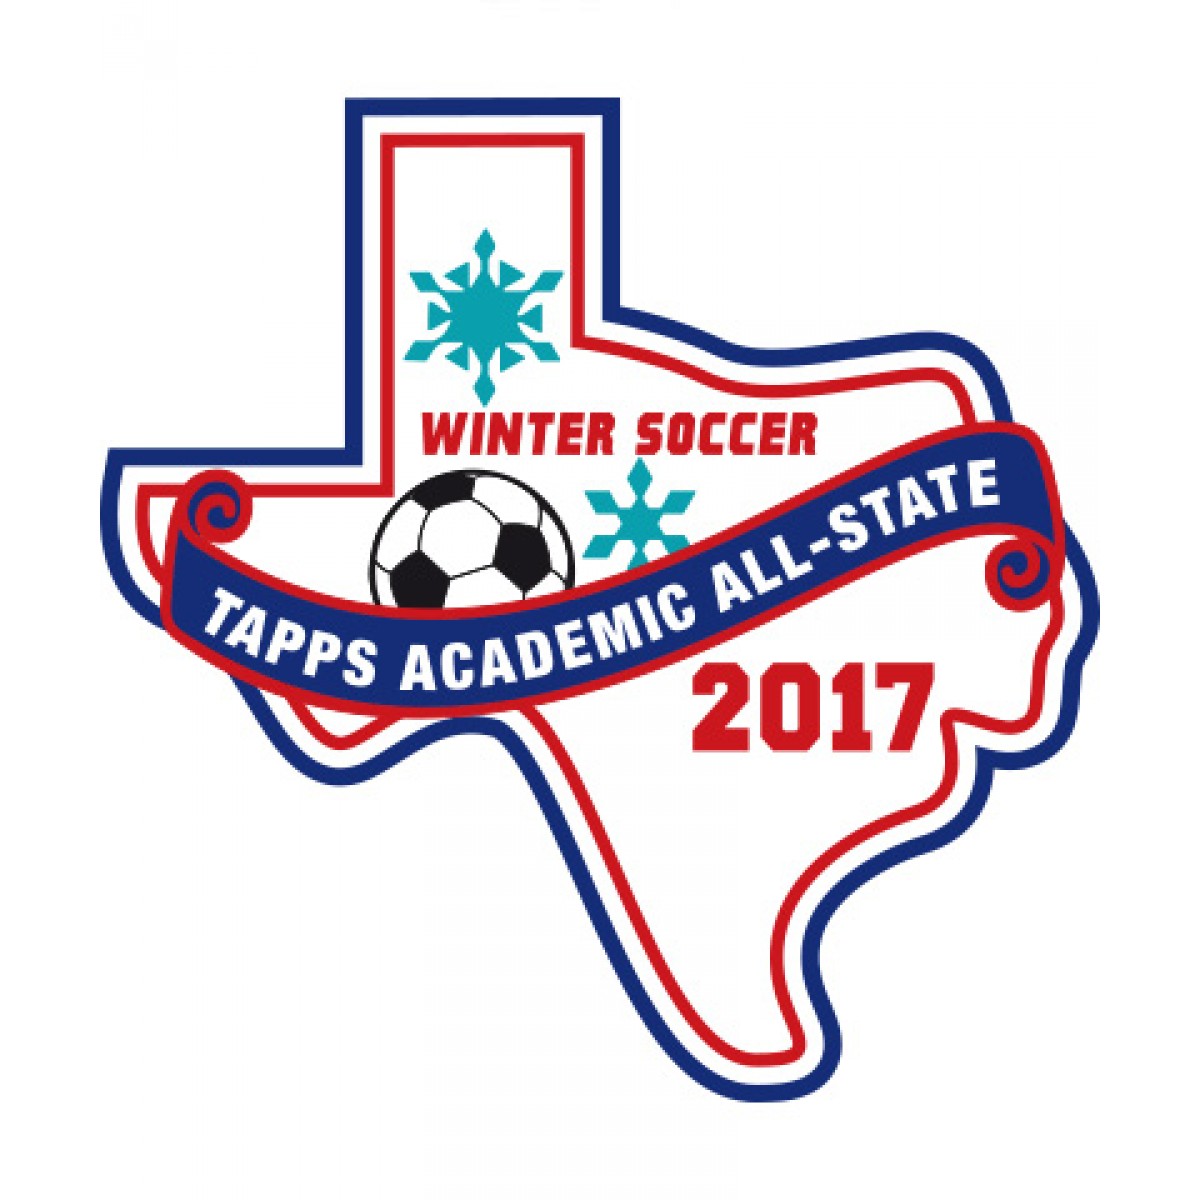 Felt 2017 TAPPS Academic All-State Winter Soccer Patch